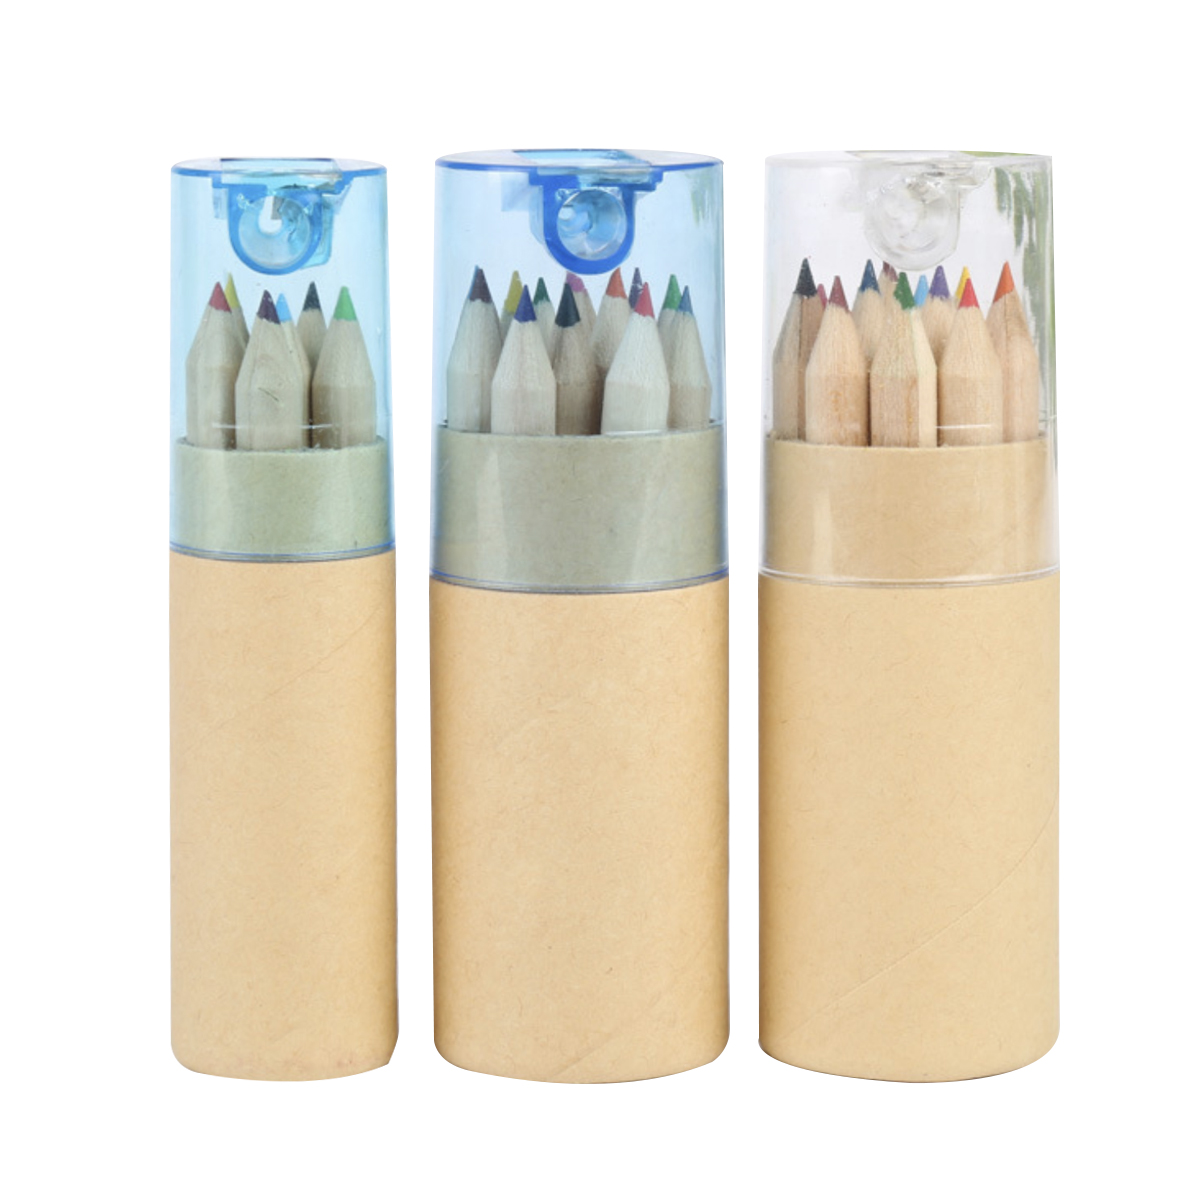 12pcs Colored Pencil with Sharpener Set